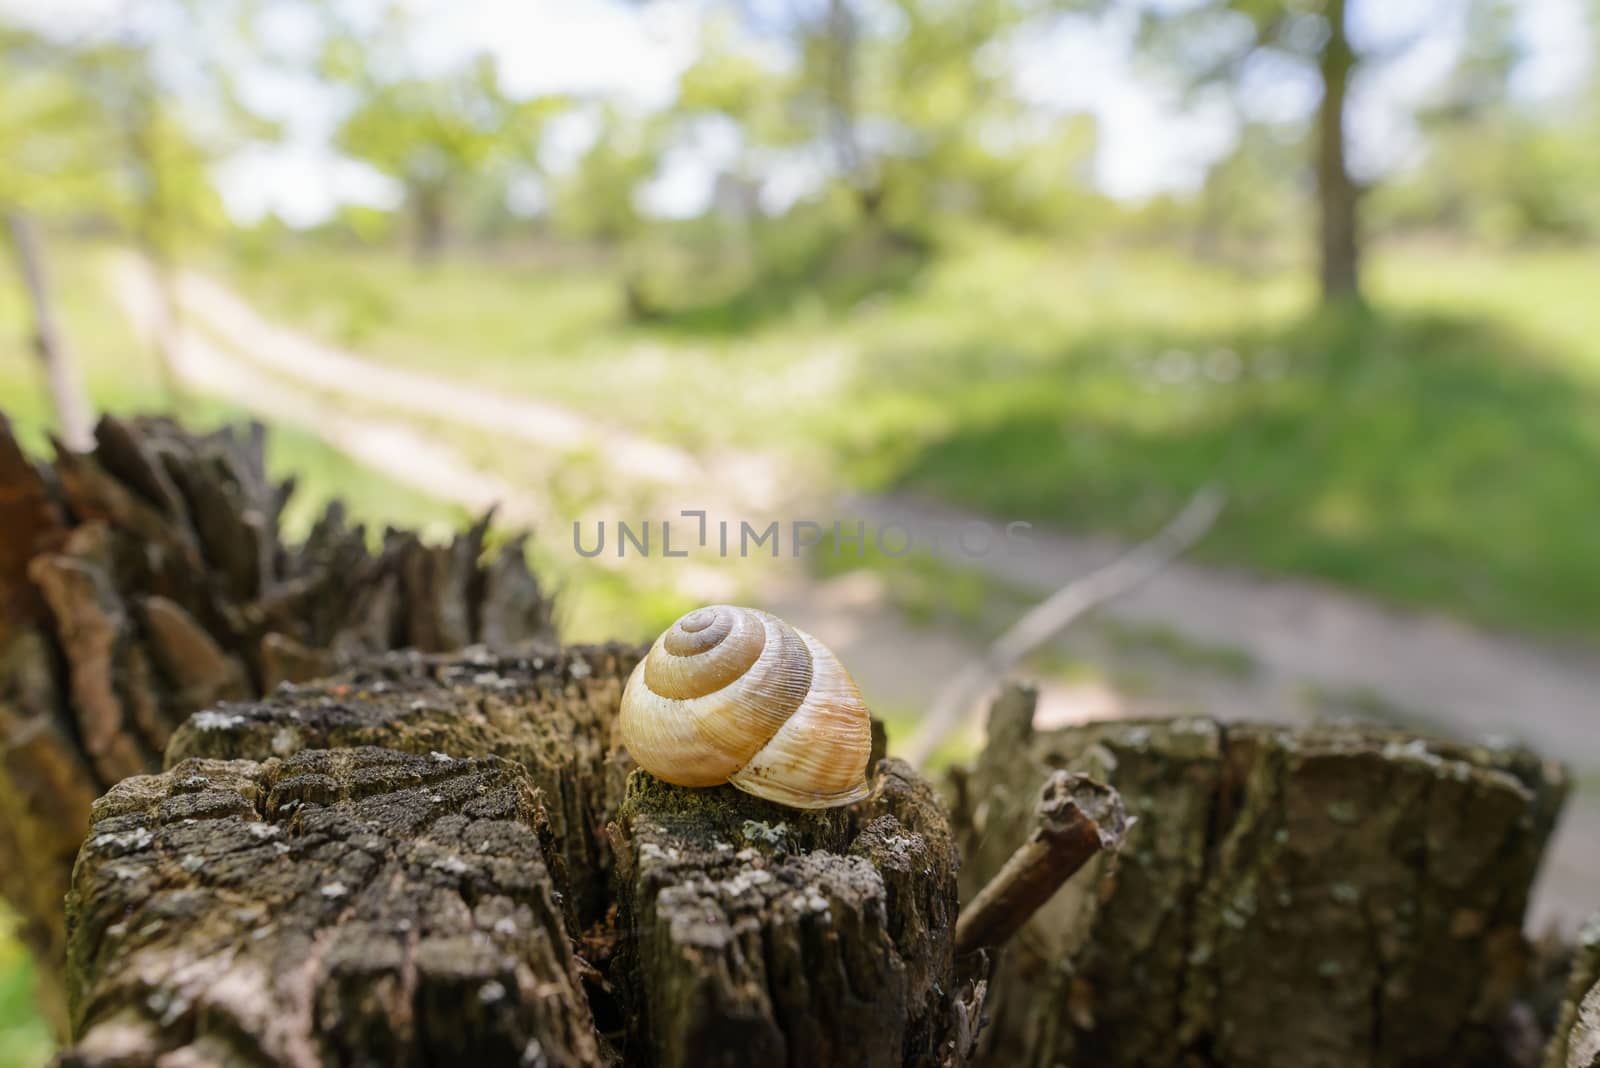 Single snail shell, on a tree trunk in the dark forest, under a dramatic light, close to a country road in spring